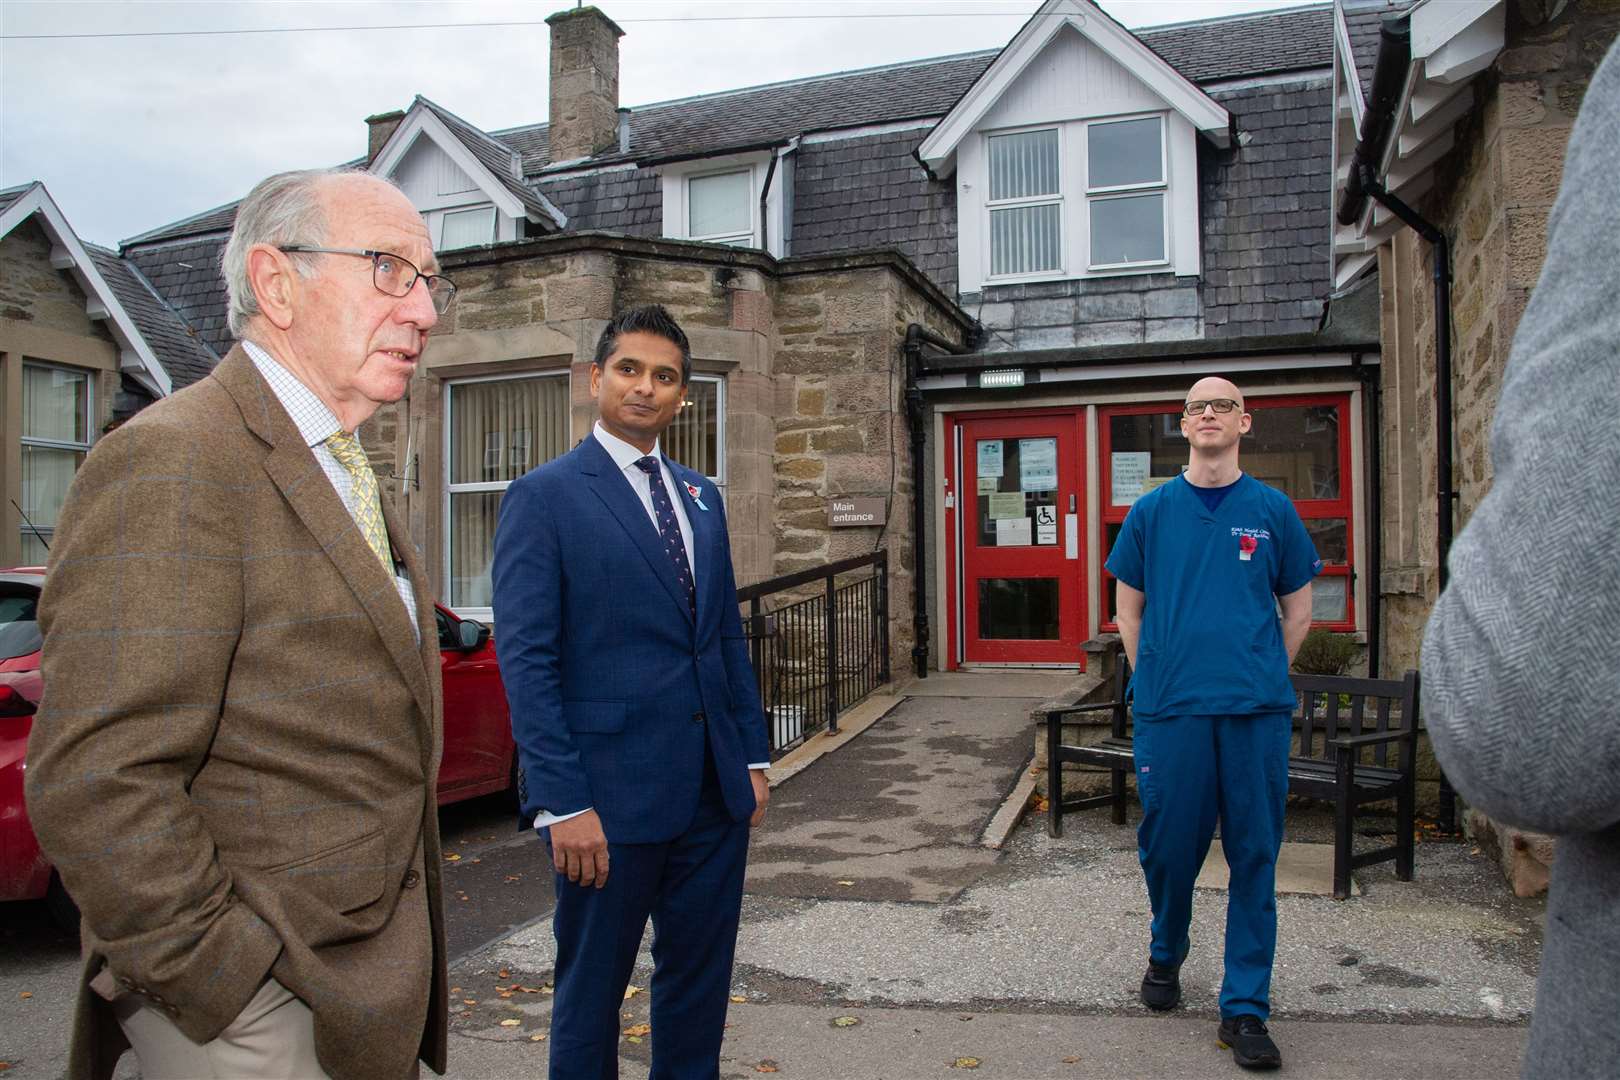 Discussions between long-time local health campaigner Leon Stelmach (left), shadow spokesperson for health and social care Dr Sandesh Gulhane (second left) and Dr David Rathband at Keith's Turner Memorial Hospital and Heath Centre. Picture: Daniel Forsyth.